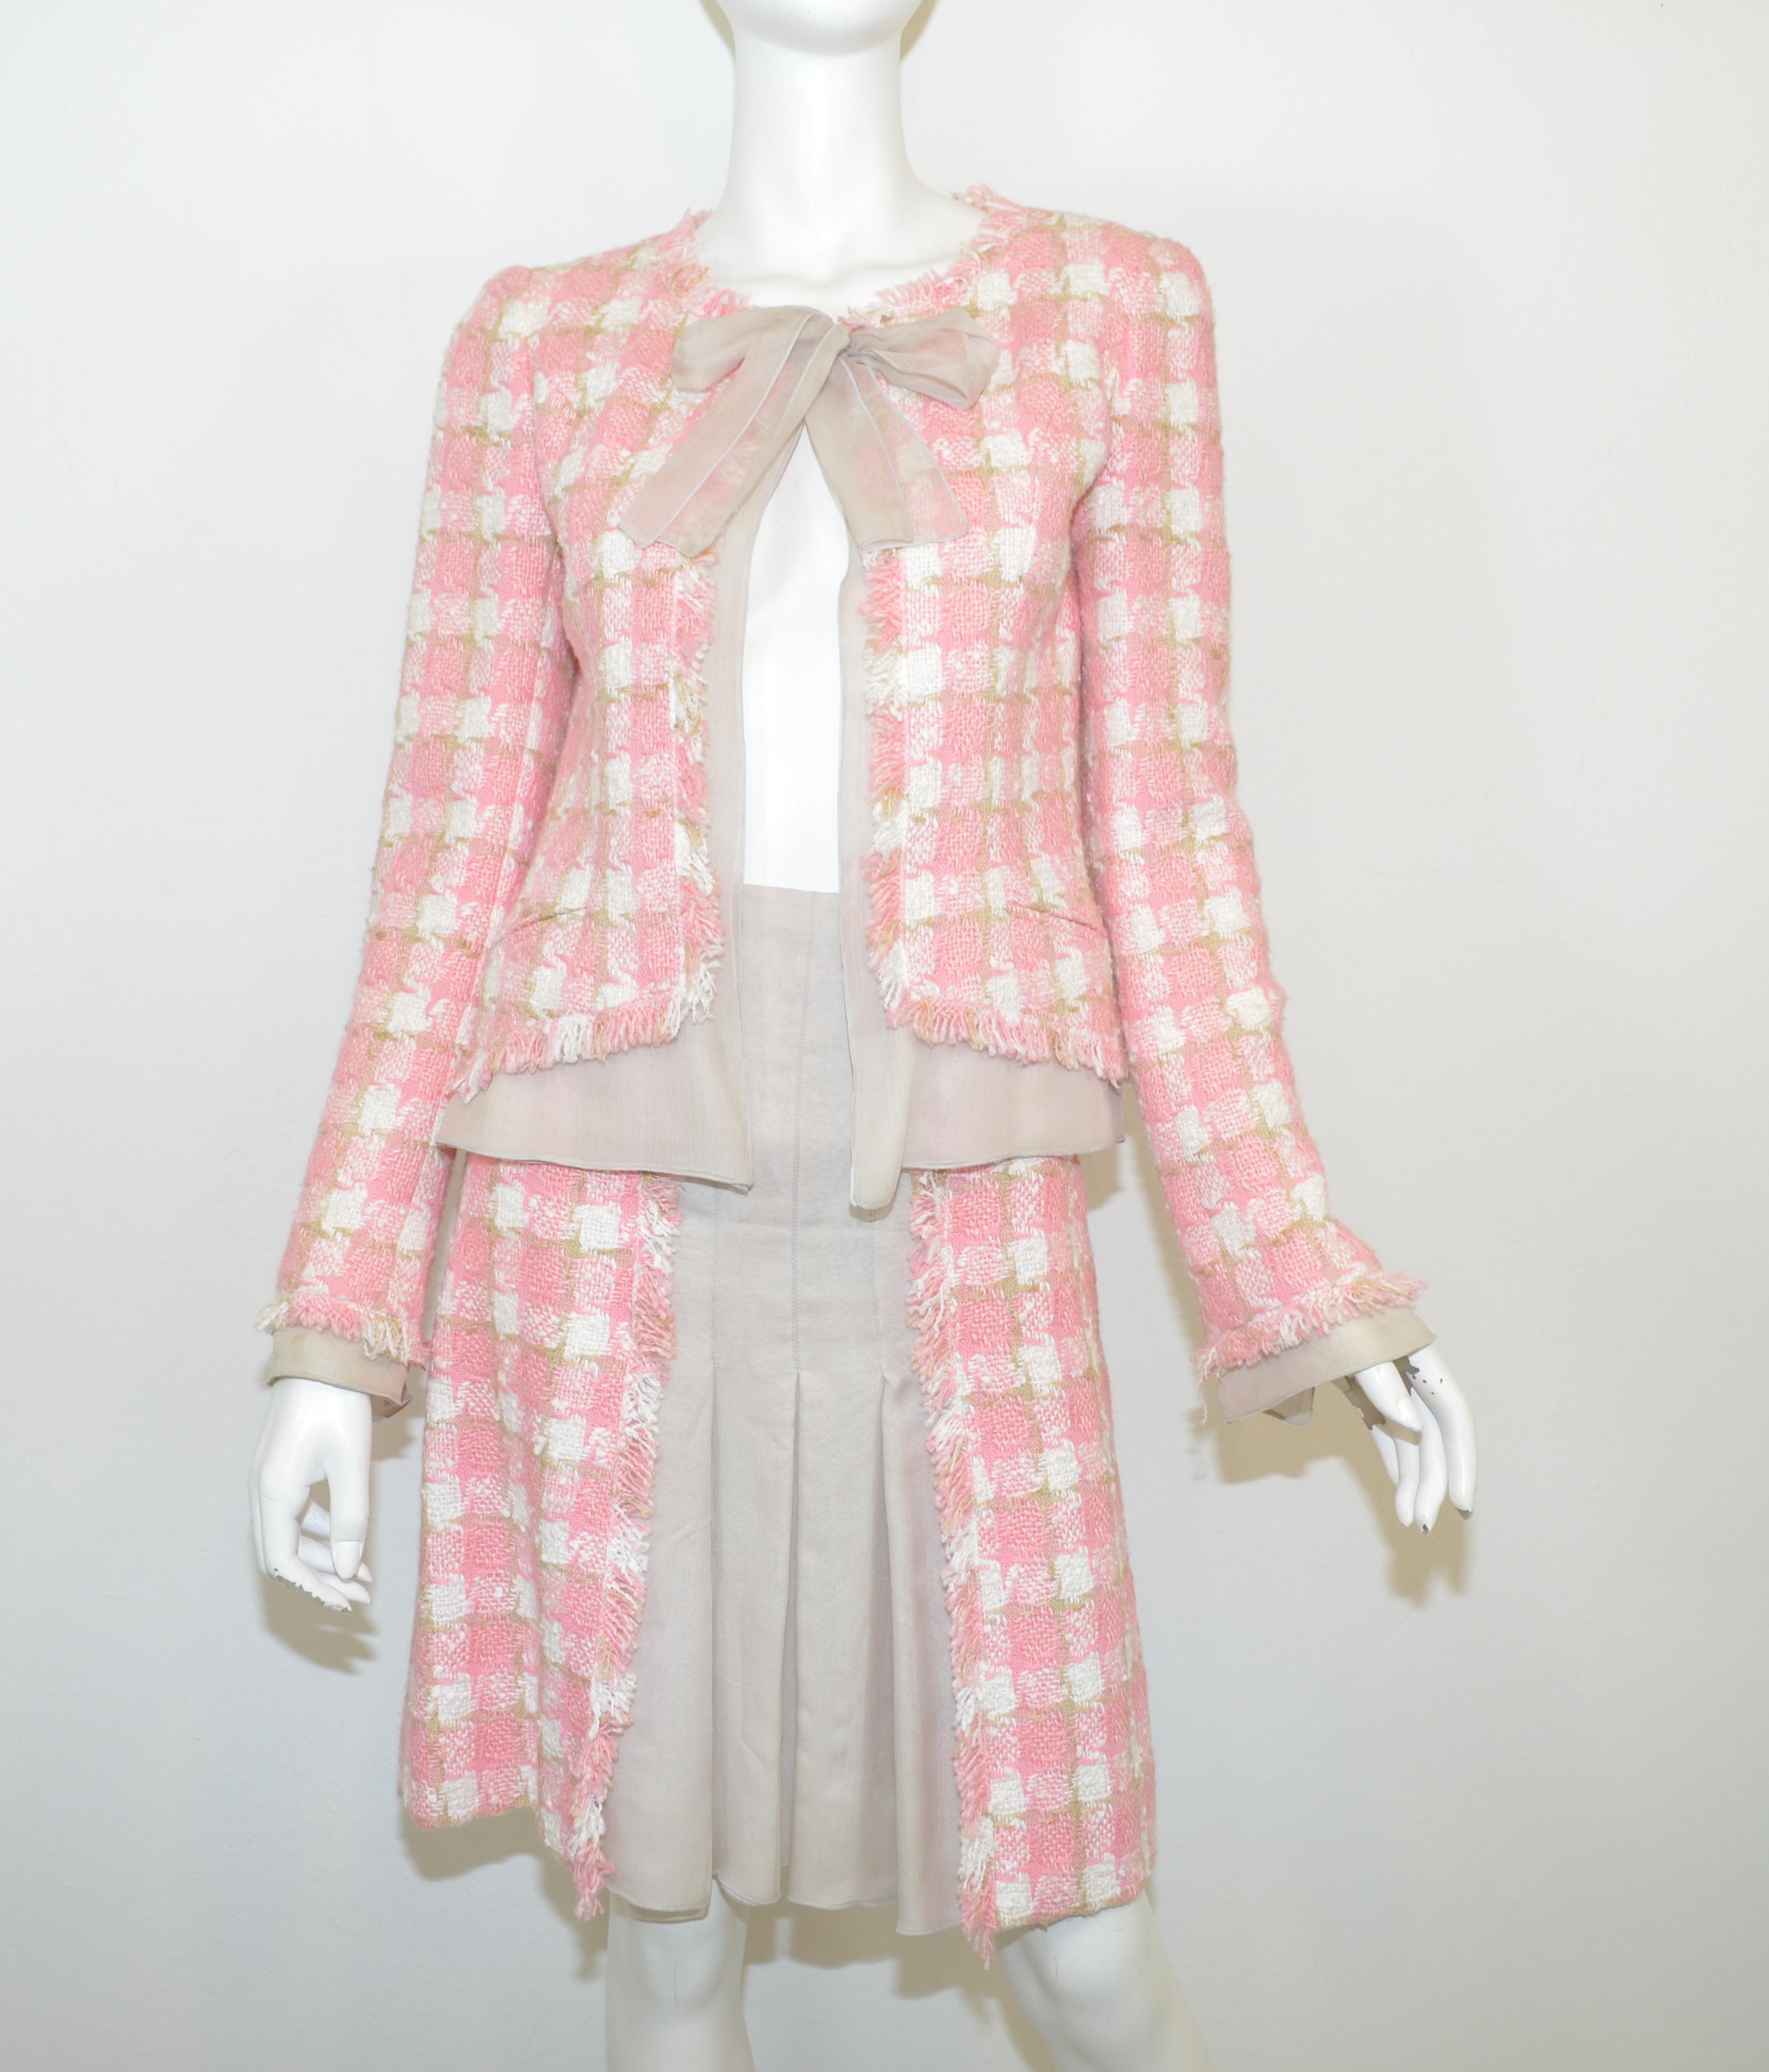 This Chanel skirt set is featured in a pink, white, and beige tweed knit with a light taupe silk chiffon trim. Jacket has a chiffon silk neck tie and button closure with two uncut pockets at the waist. Skirt has a silk chiffon pleated panel at the